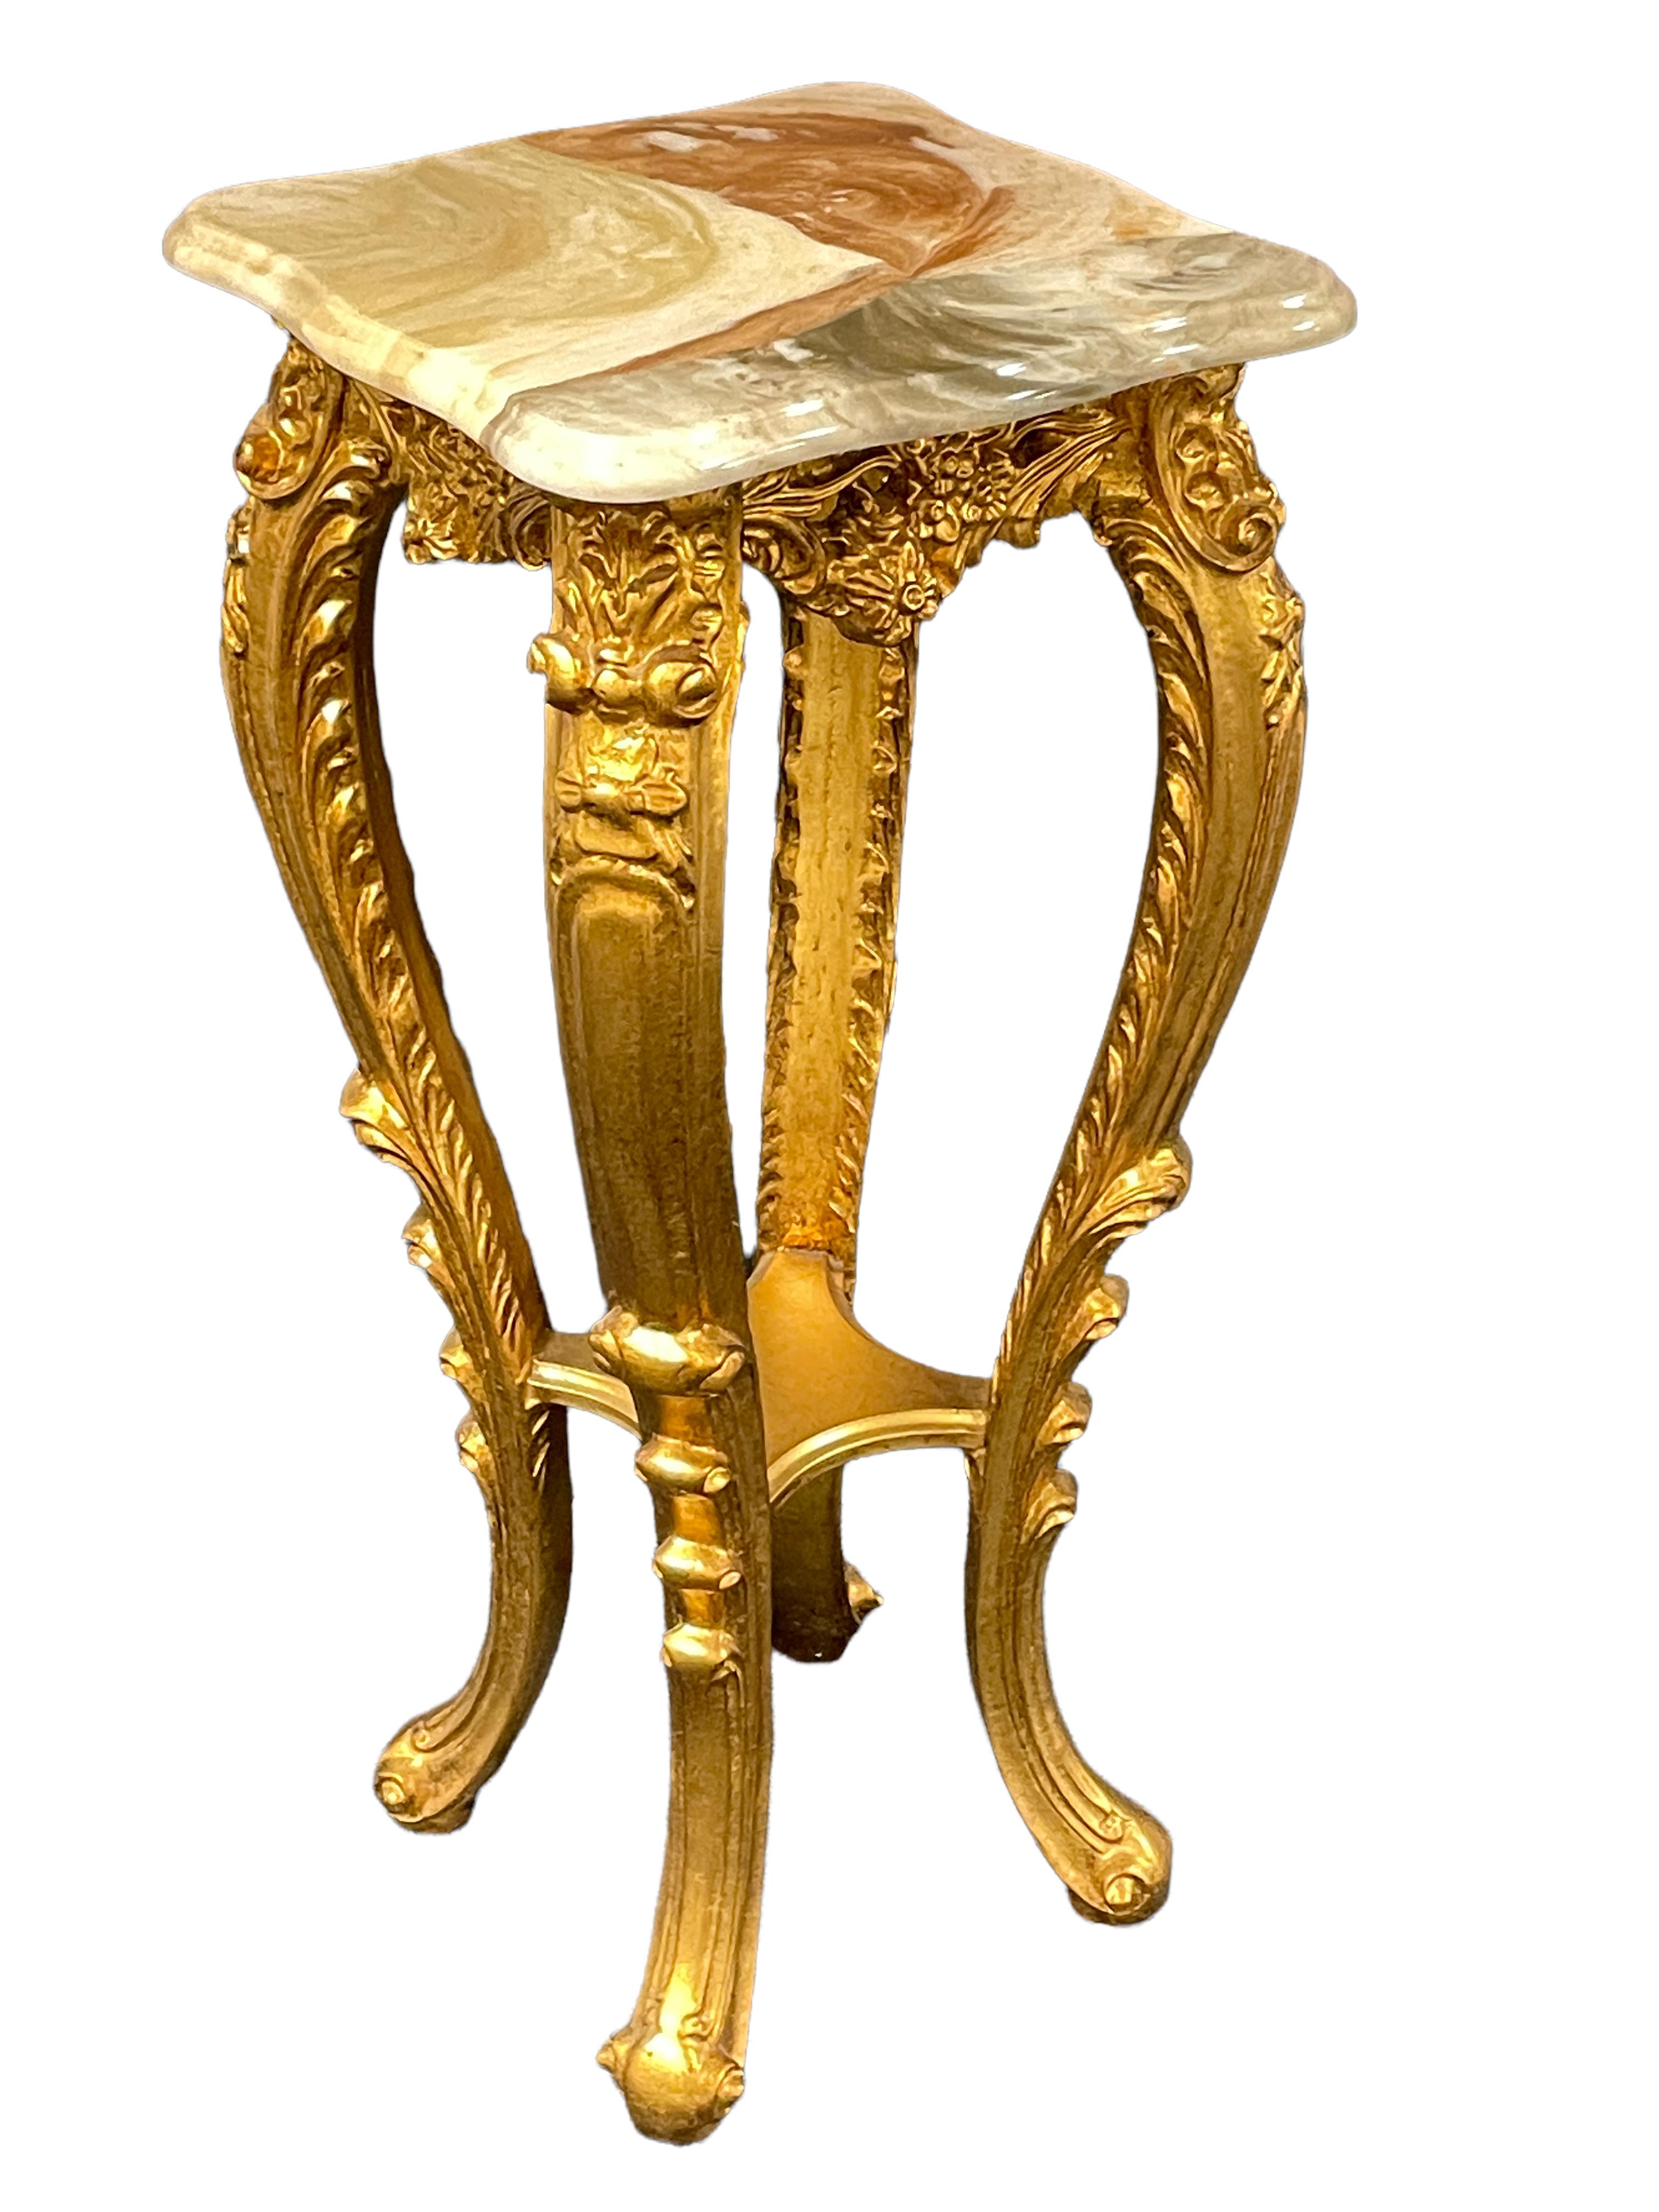 20th Century Carved Gilt Wood Toleware Console Pedestal Table, Italy For Sale 5